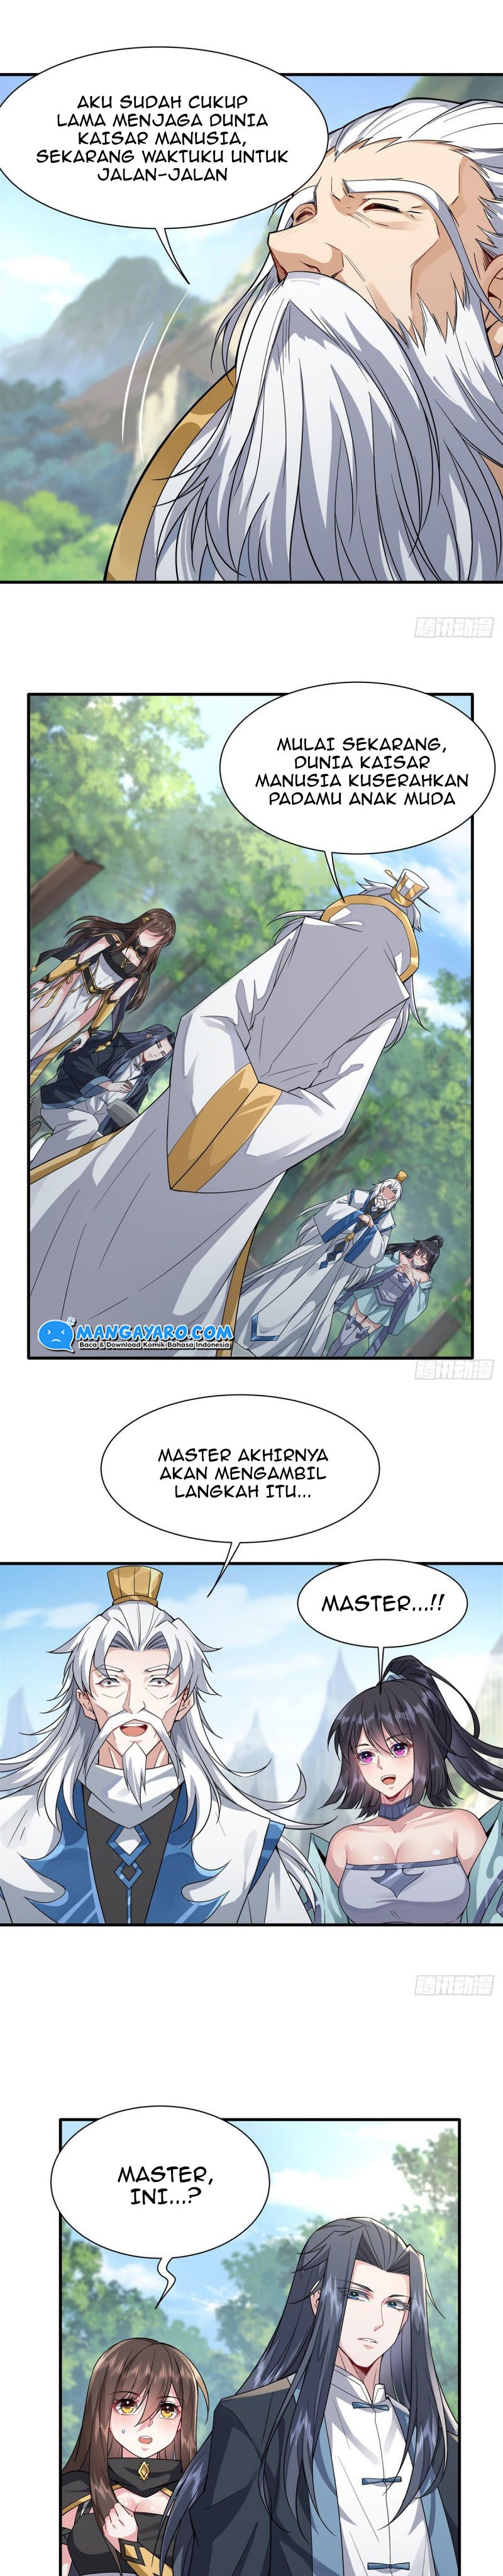 Dilarang COPAS - situs resmi www.mangacanblog.com - Komik my female apprentices are all big shots from the future 031 - chapter 31 32 Indonesia my female apprentices are all big shots from the future 031 - chapter 31 Terbaru 4|Baca Manga Komik Indonesia|Mangacan